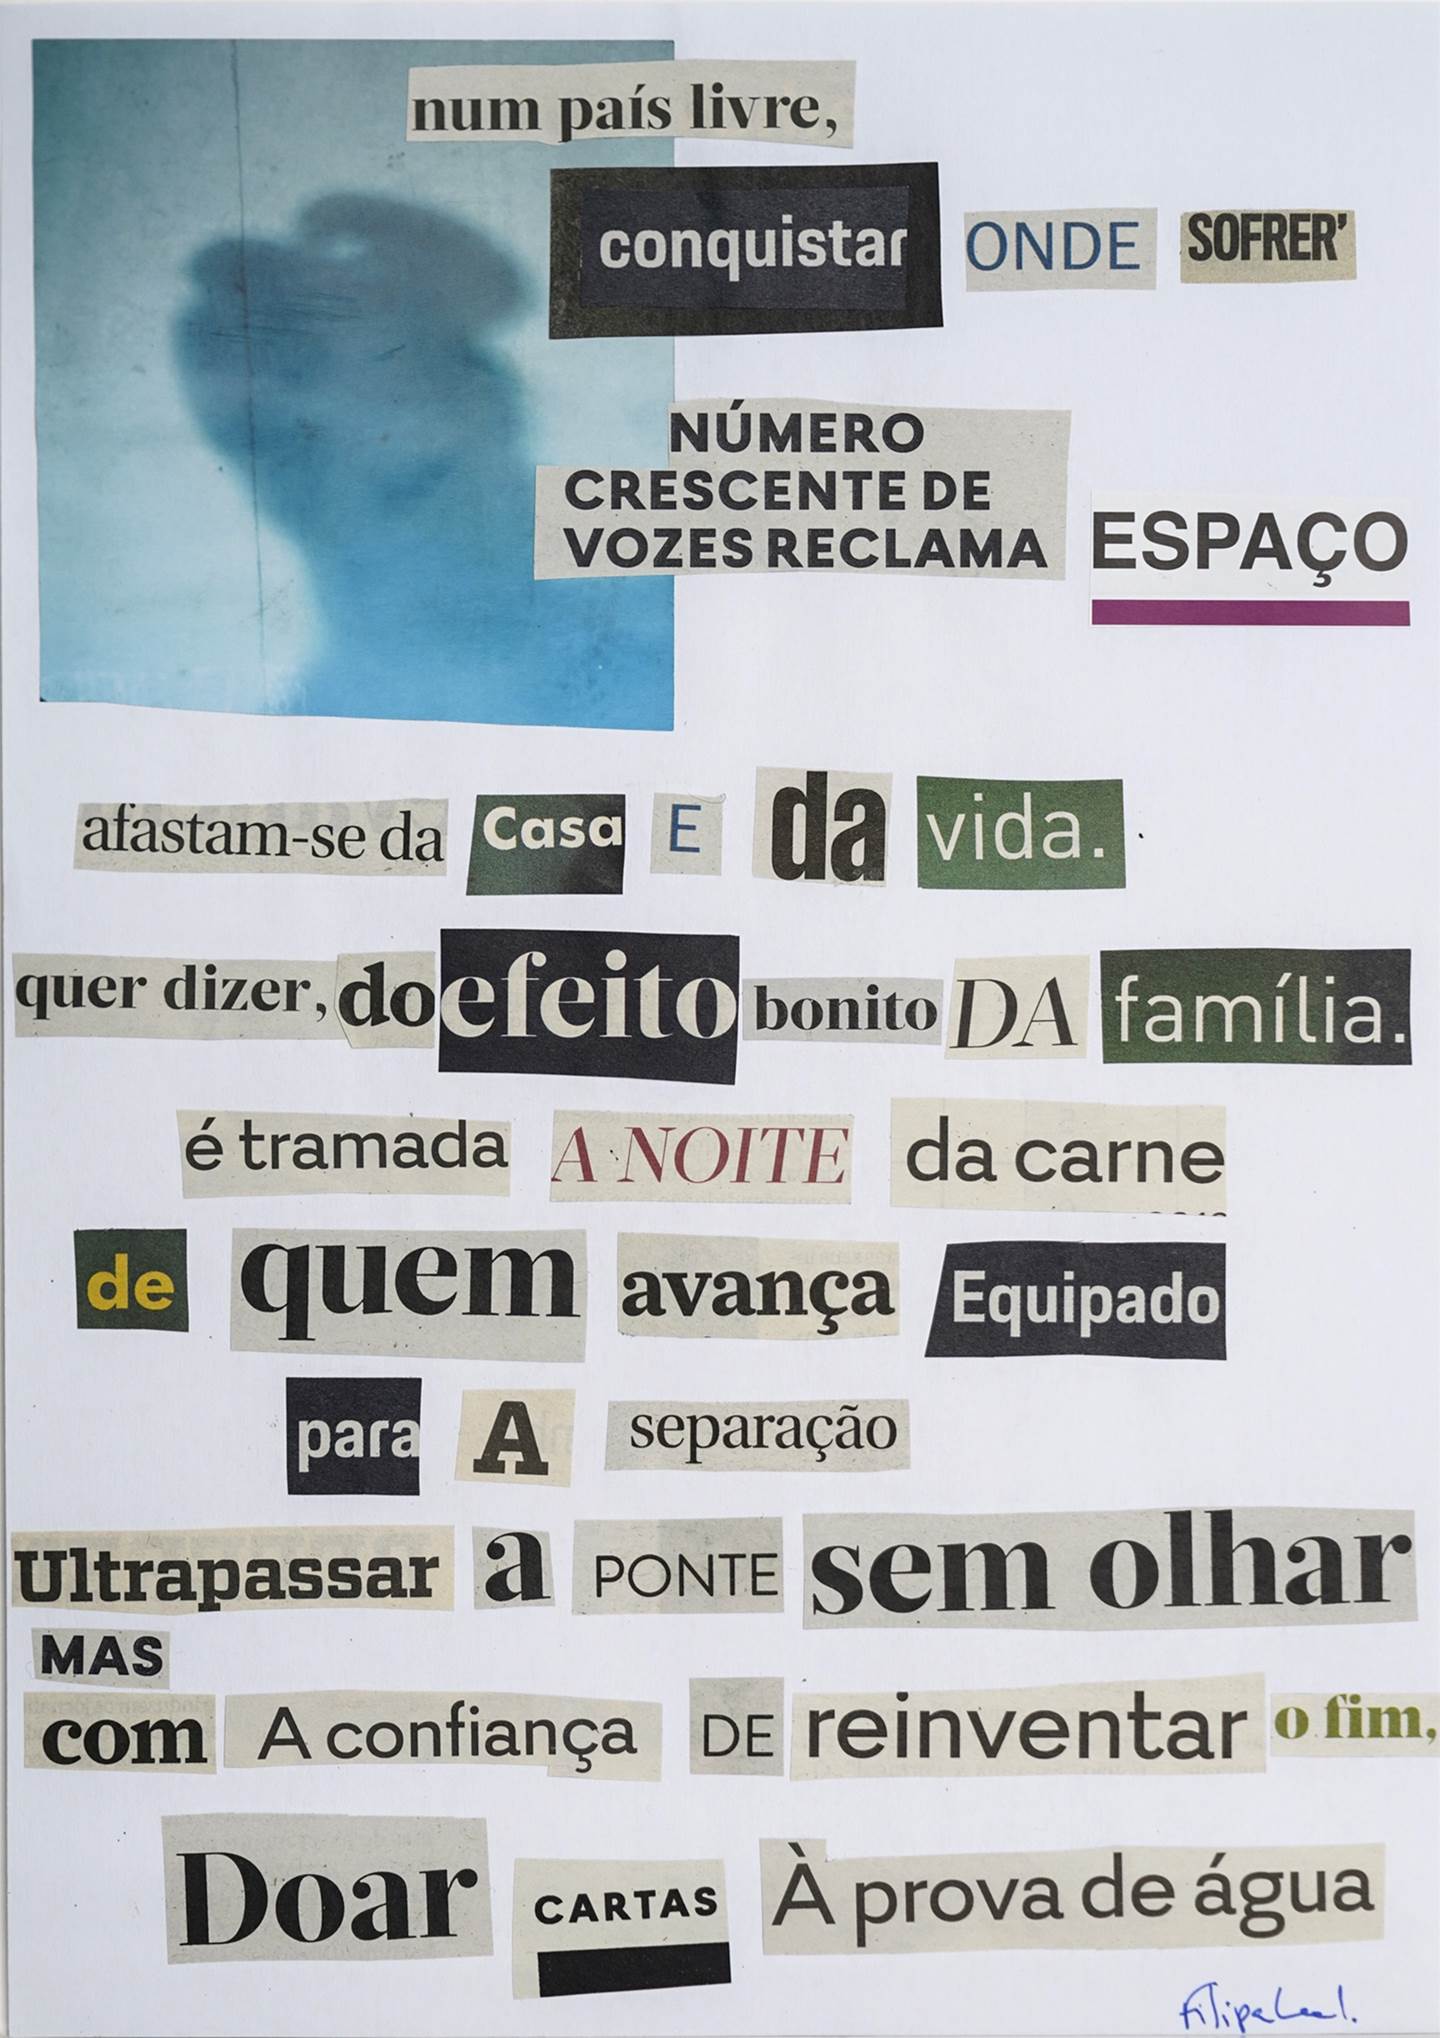 NUM PAÍS LIVRE, CONQUISTAR ONDE SOFRER, original Abstract Collage Drawing and Illustration by Filipa  Leal